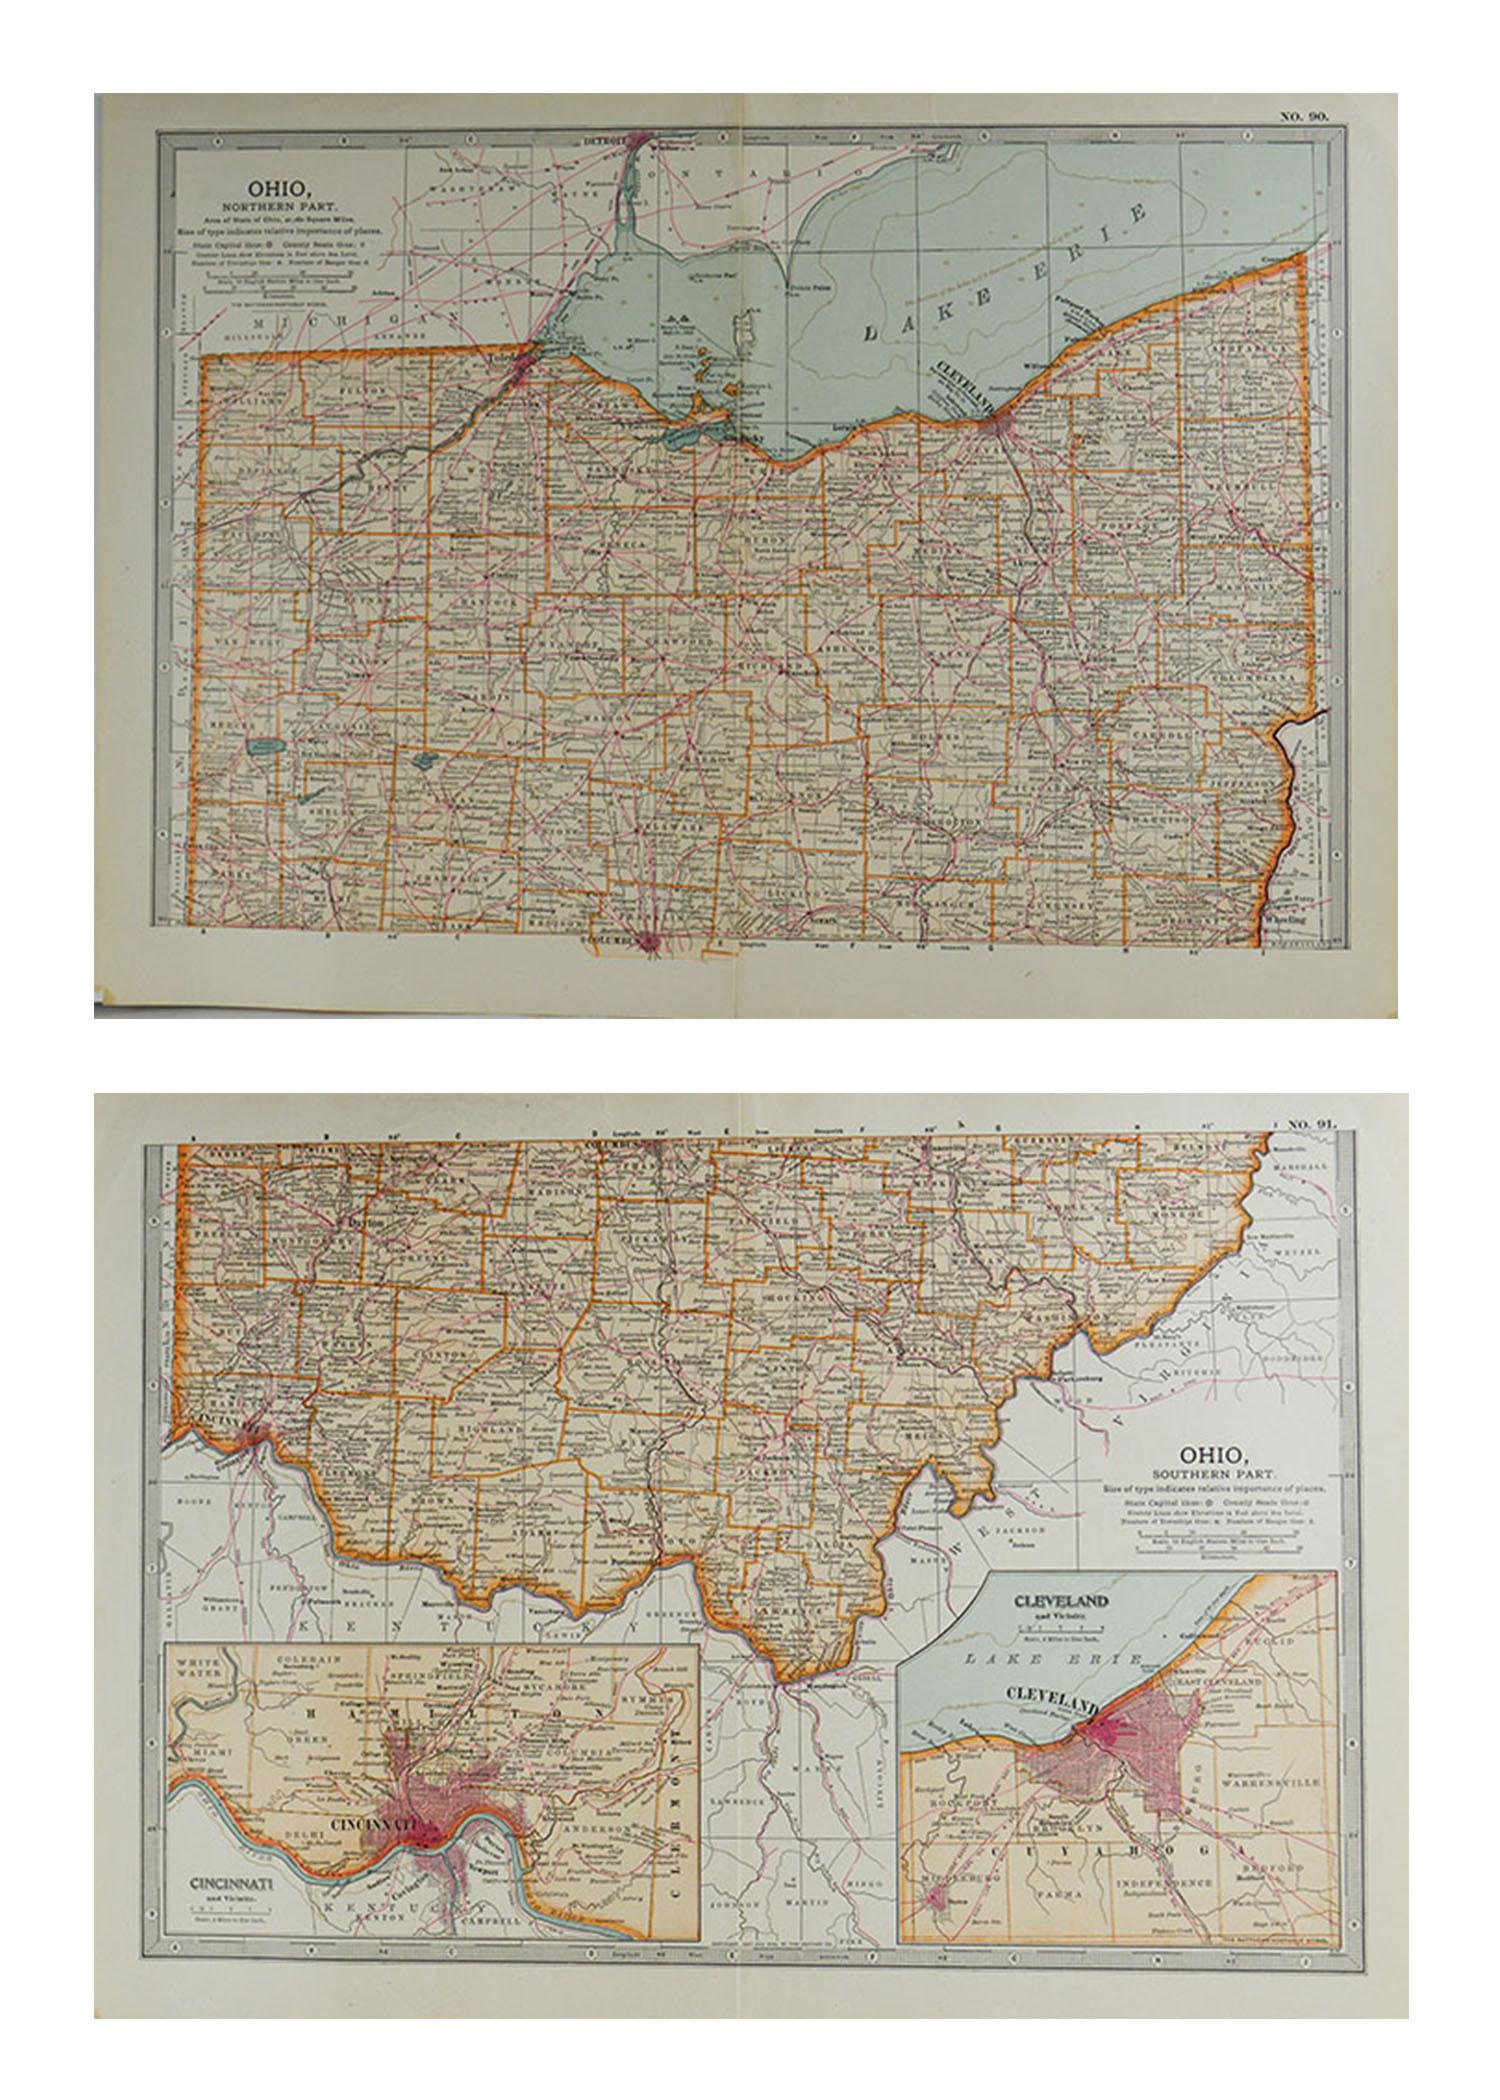 Great map of Ohio (in 2 parts)

Original color.

Published, circa 1890

Repairs to few minor edge tears

The measurement given below is for one sheet

Unframed.
 